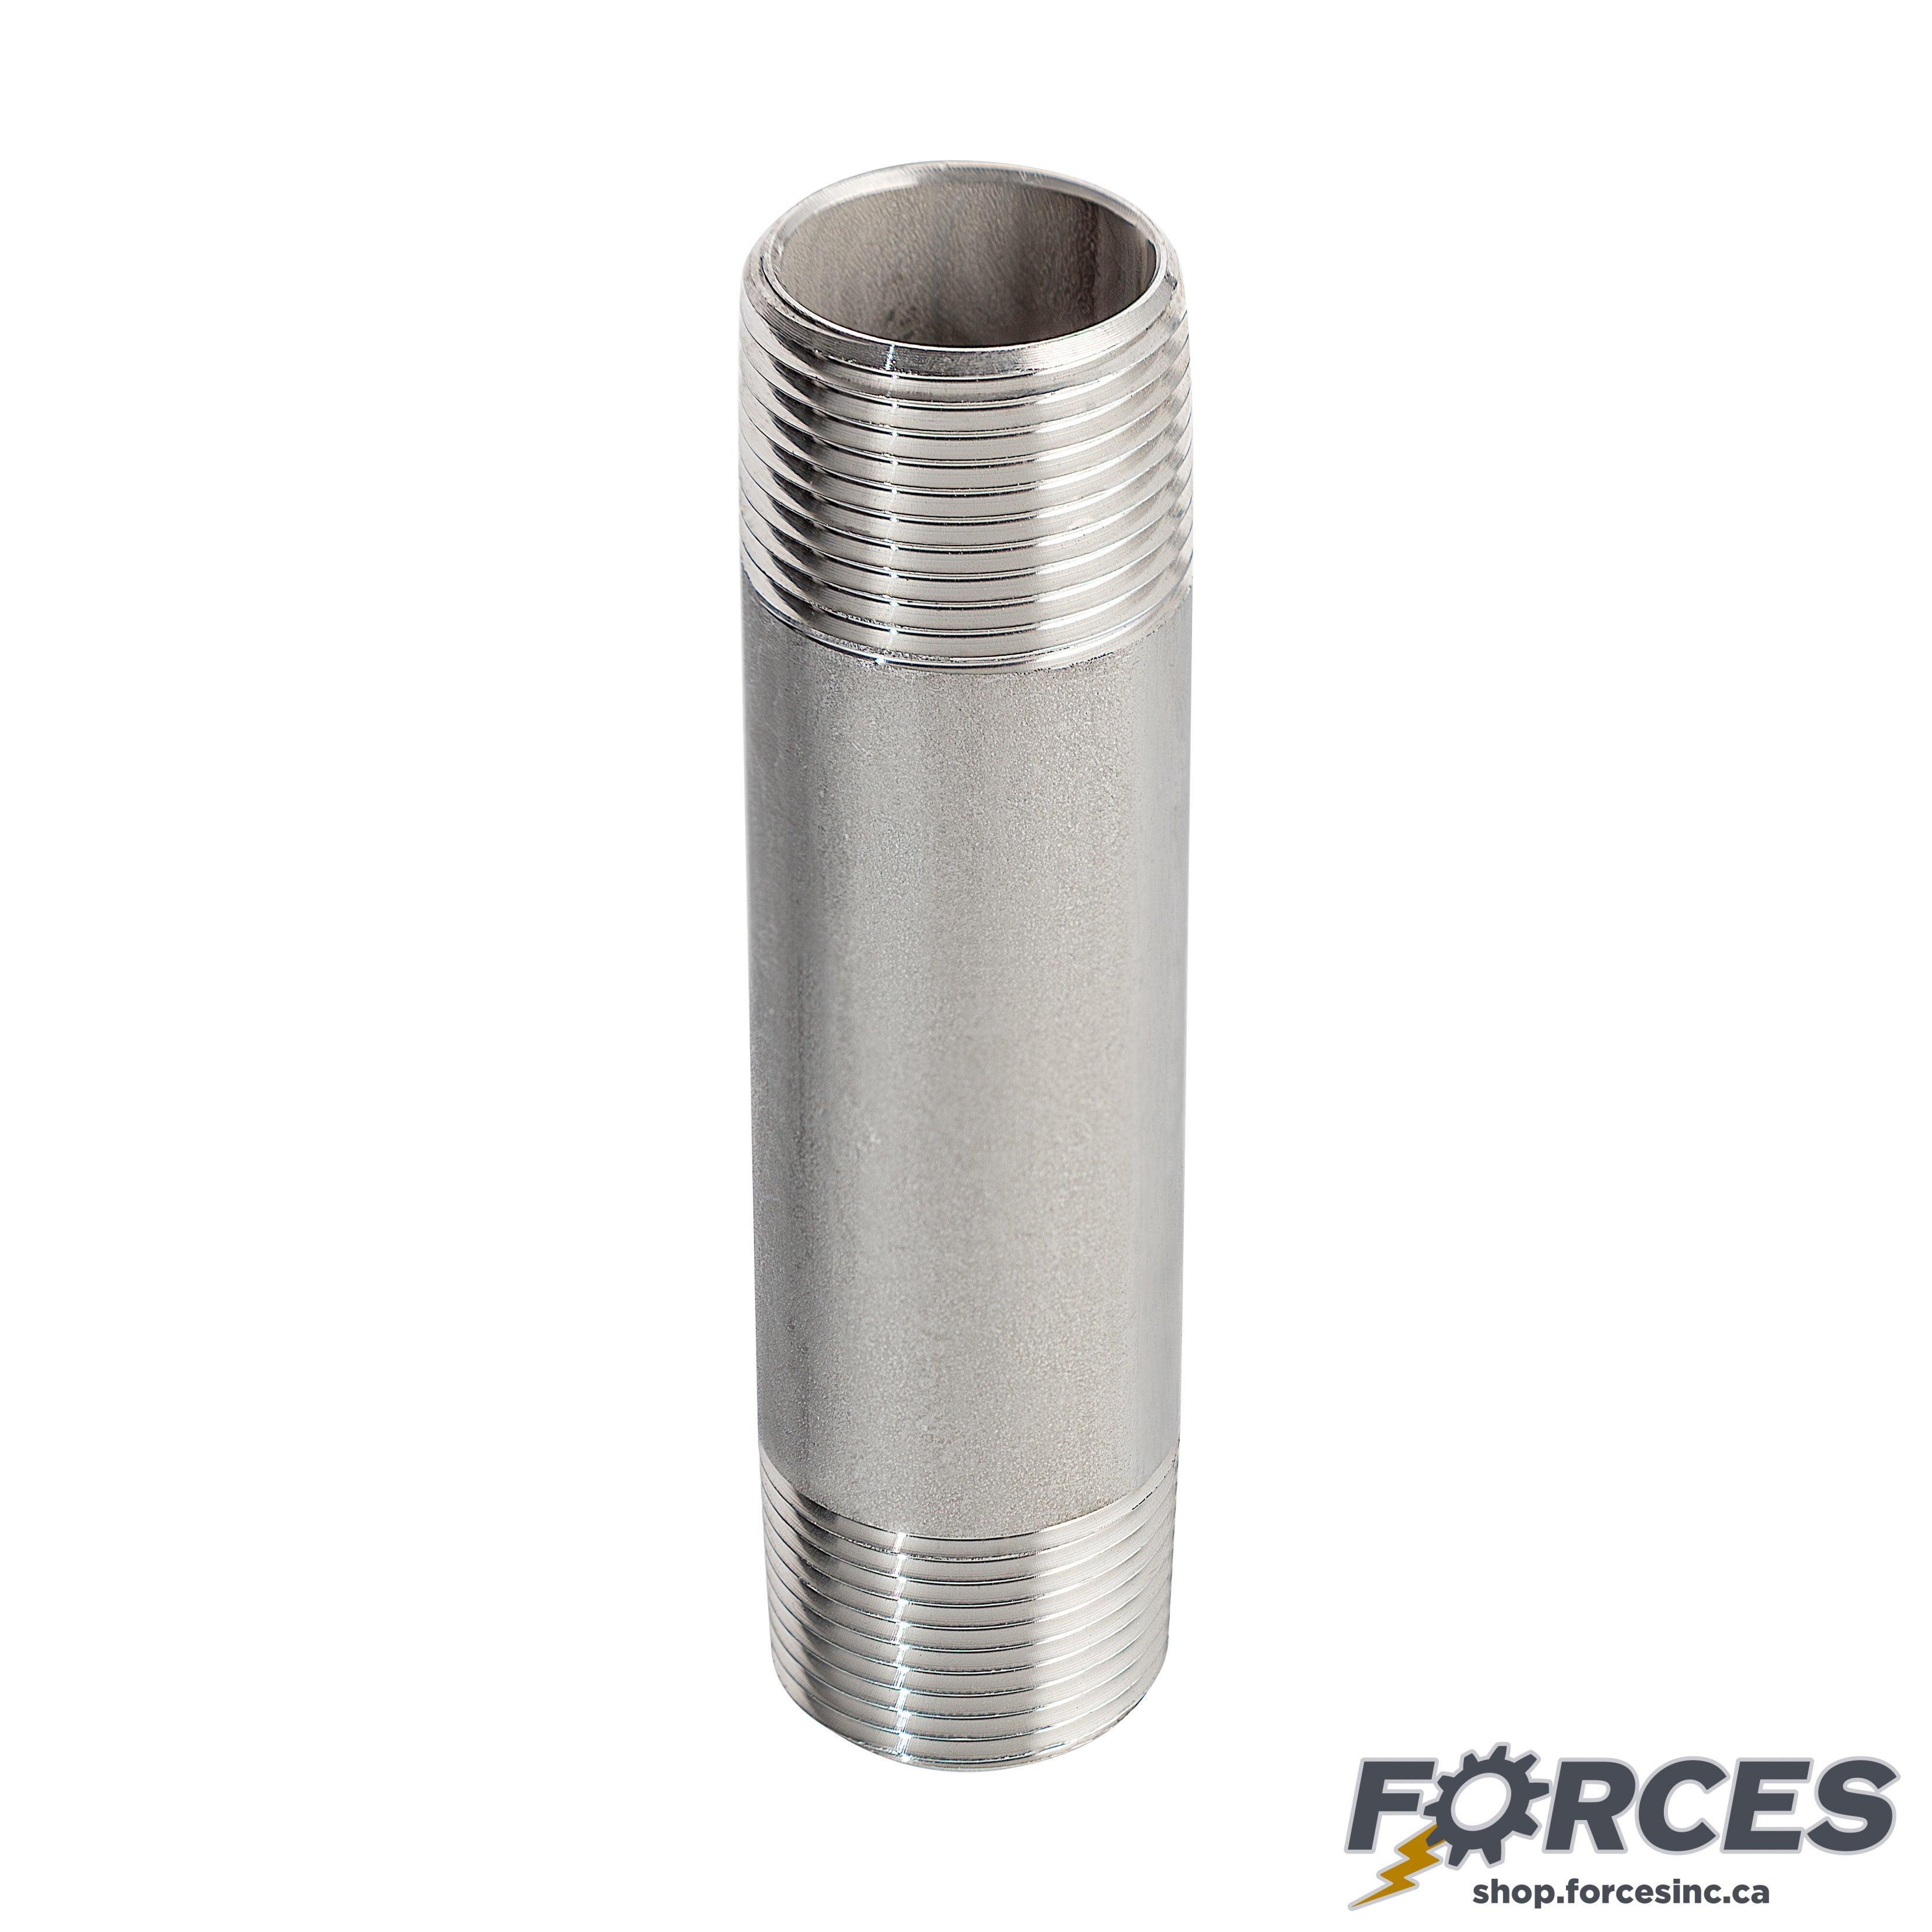 1/4" X 6" Long Nipple - Stainless Steel 316 - Forces Inc